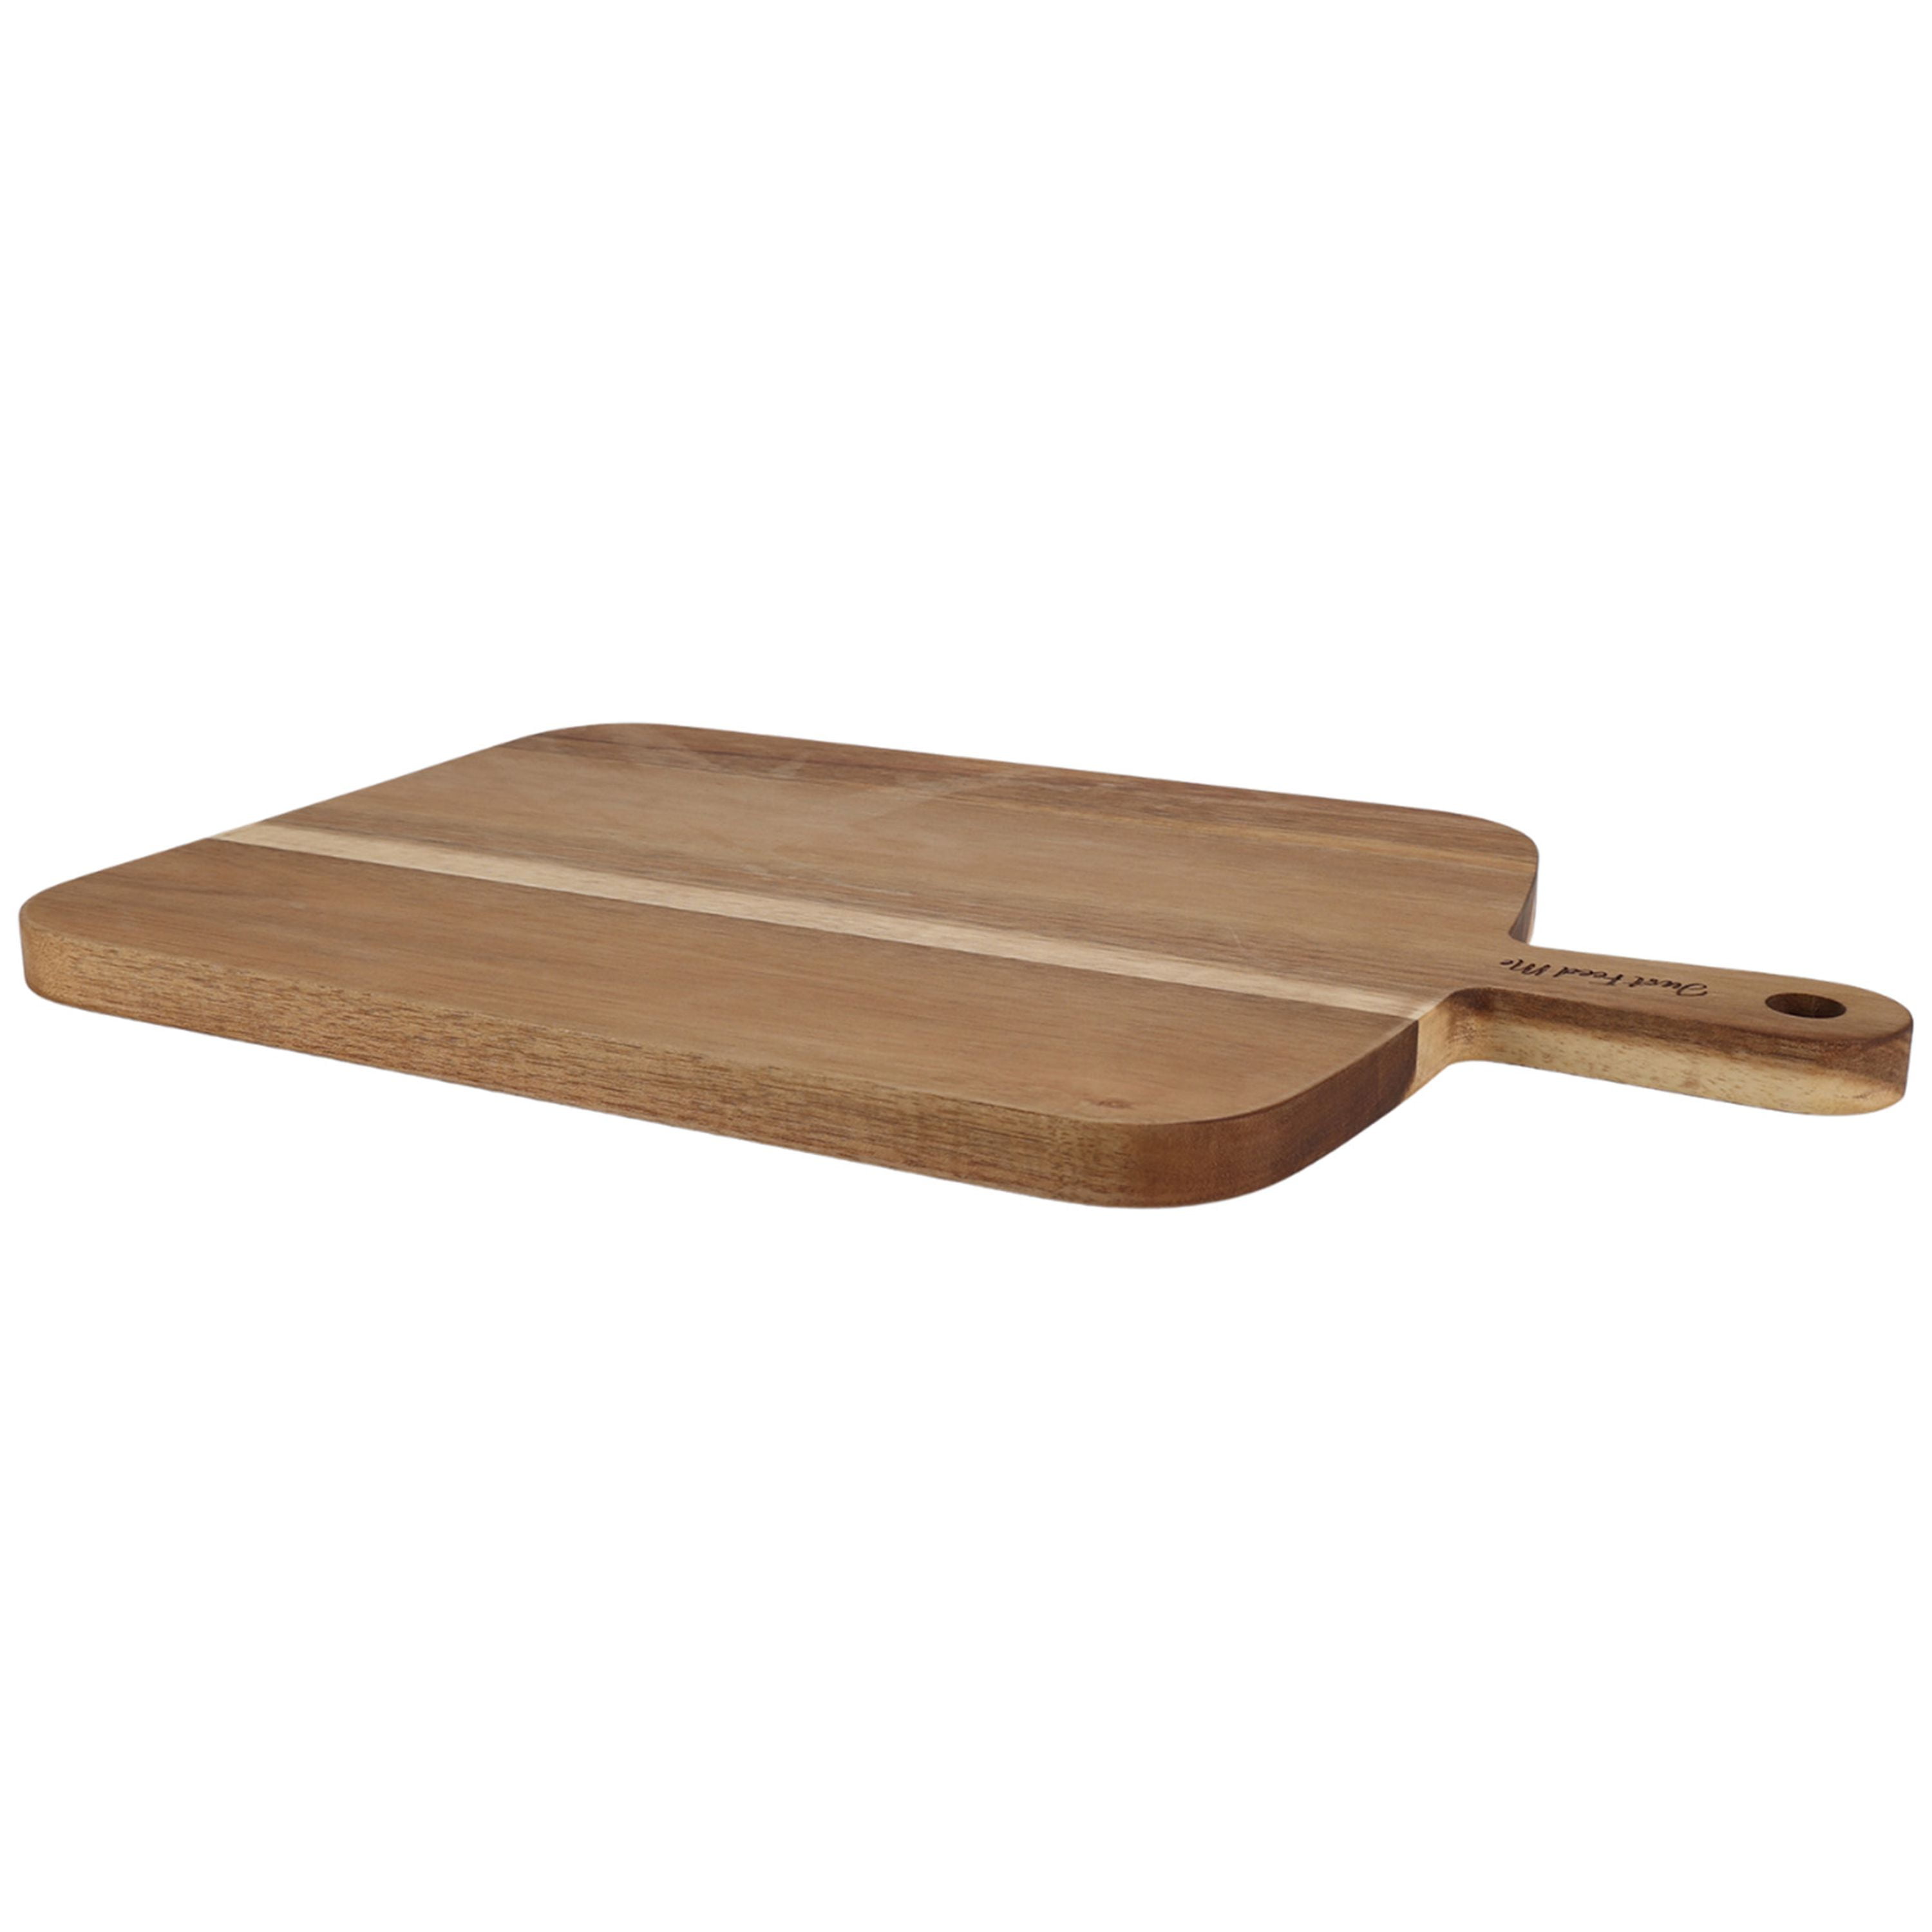 JF JAMES.F Serving Board, Acacia Wood Cutting Board with Handle Wooden  Cheese Board Charcuterie Boards Wood Board for Food Bread Fruit 15x7.5x0.6  Inch